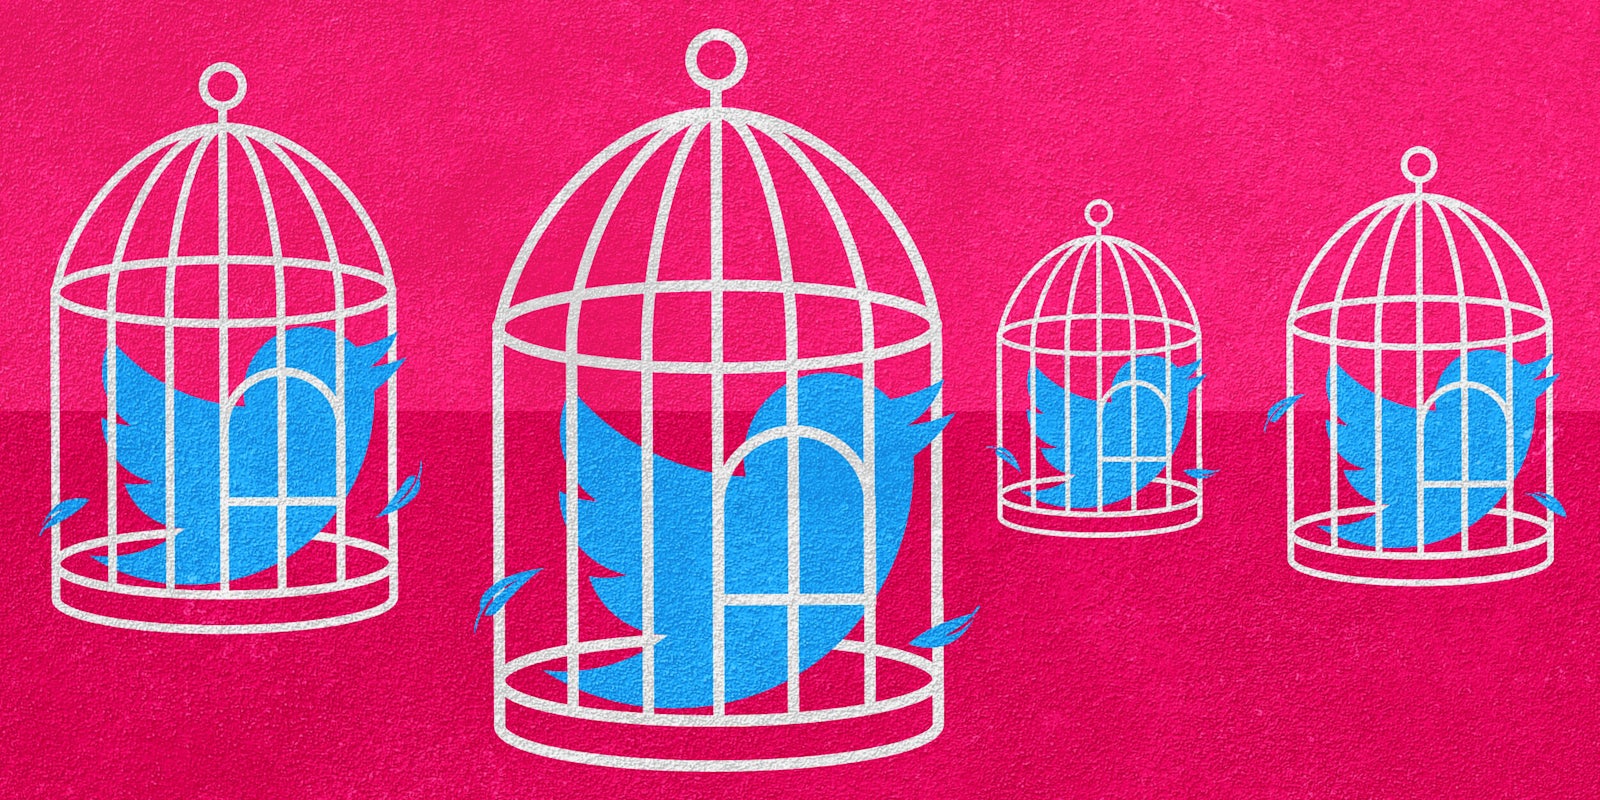 twitter birds locked in cages